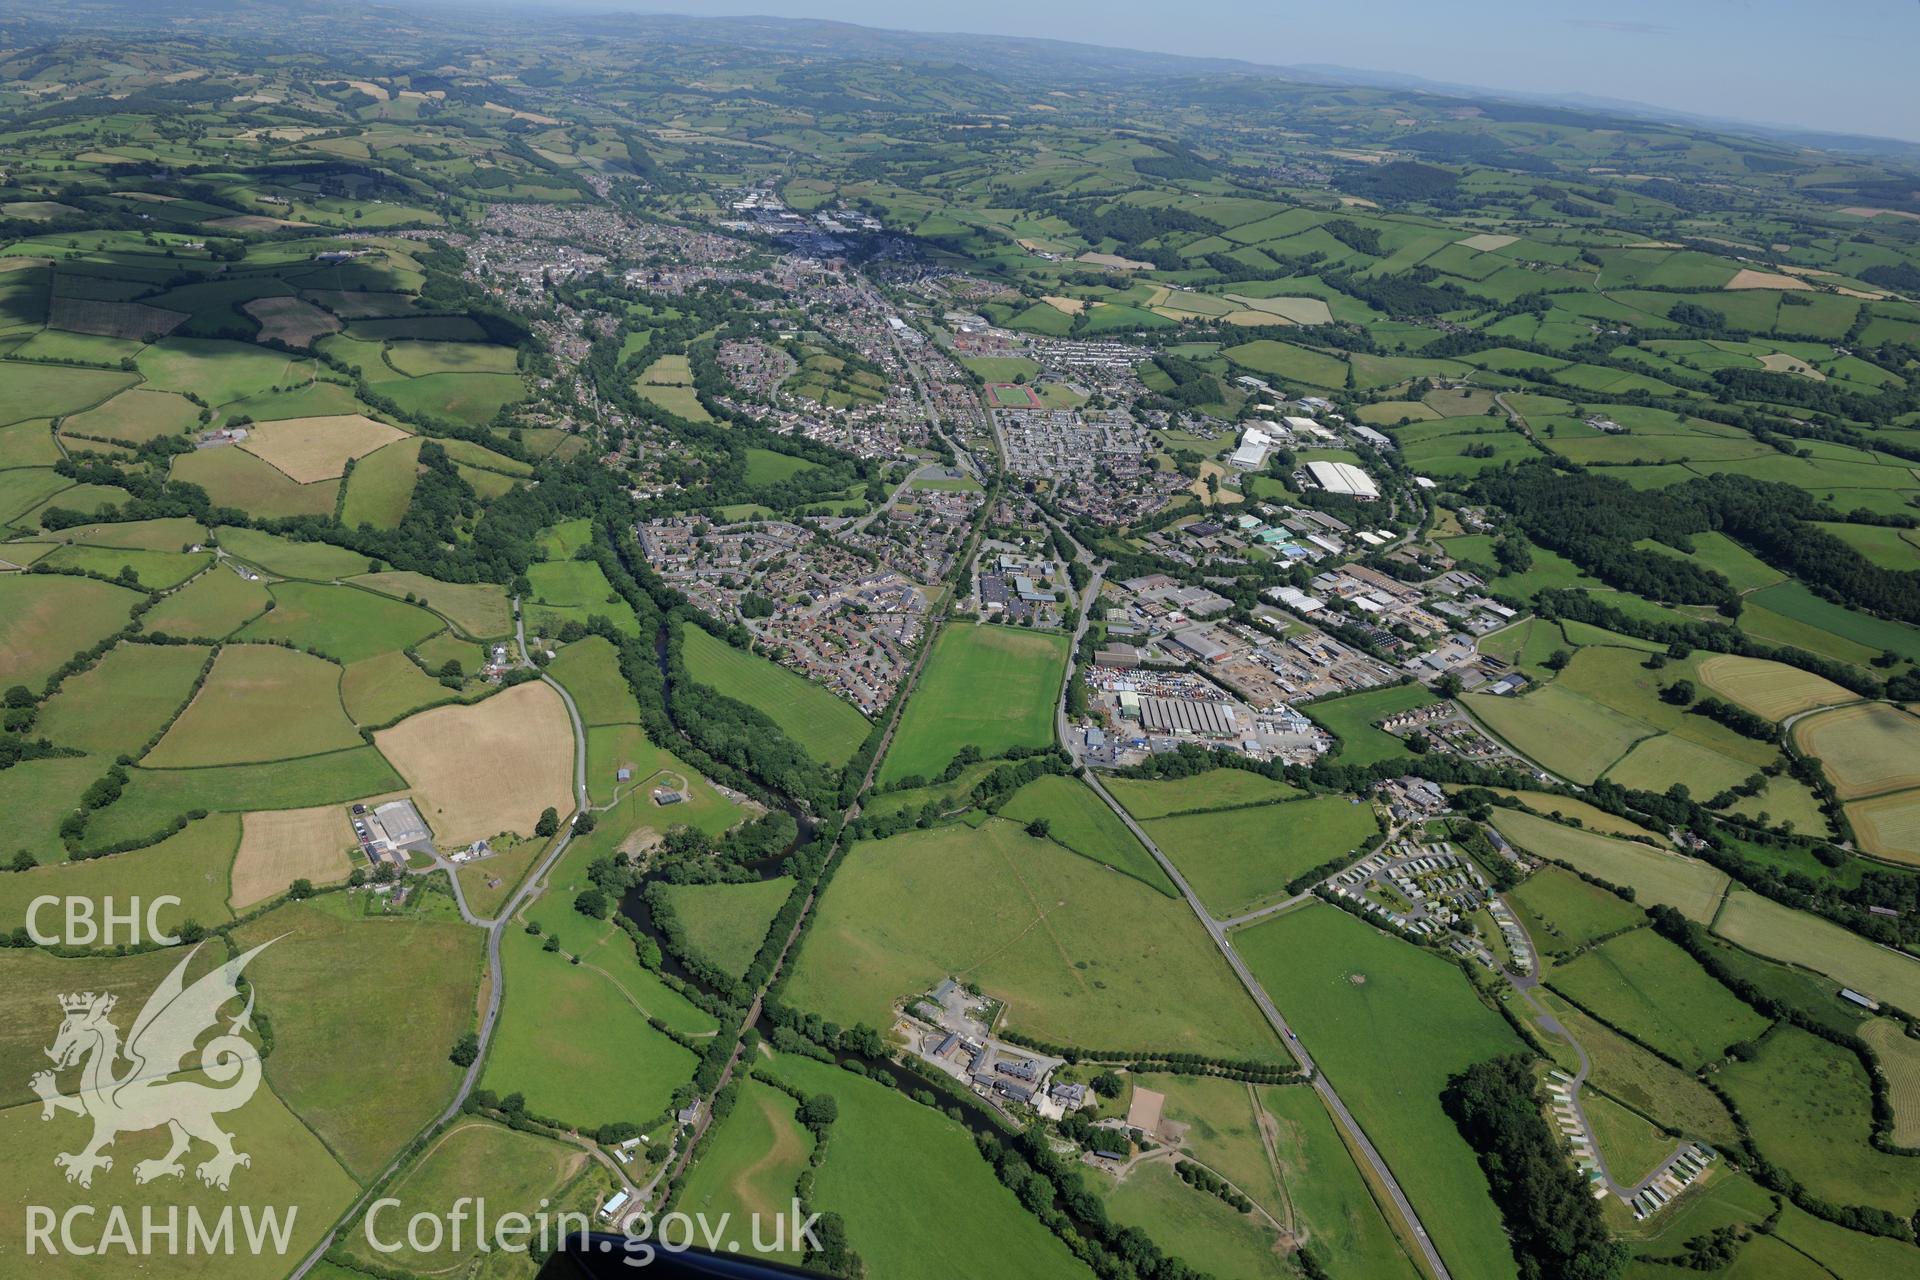 Glanhafren house and garden, the Roman road which runs through its grounds, and the town of Newtown beyond. Oblique aerial photograph taken during the Royal Commission's programme of archaeological aerial reconnaissance by Toby Driver on 30th June 2015.